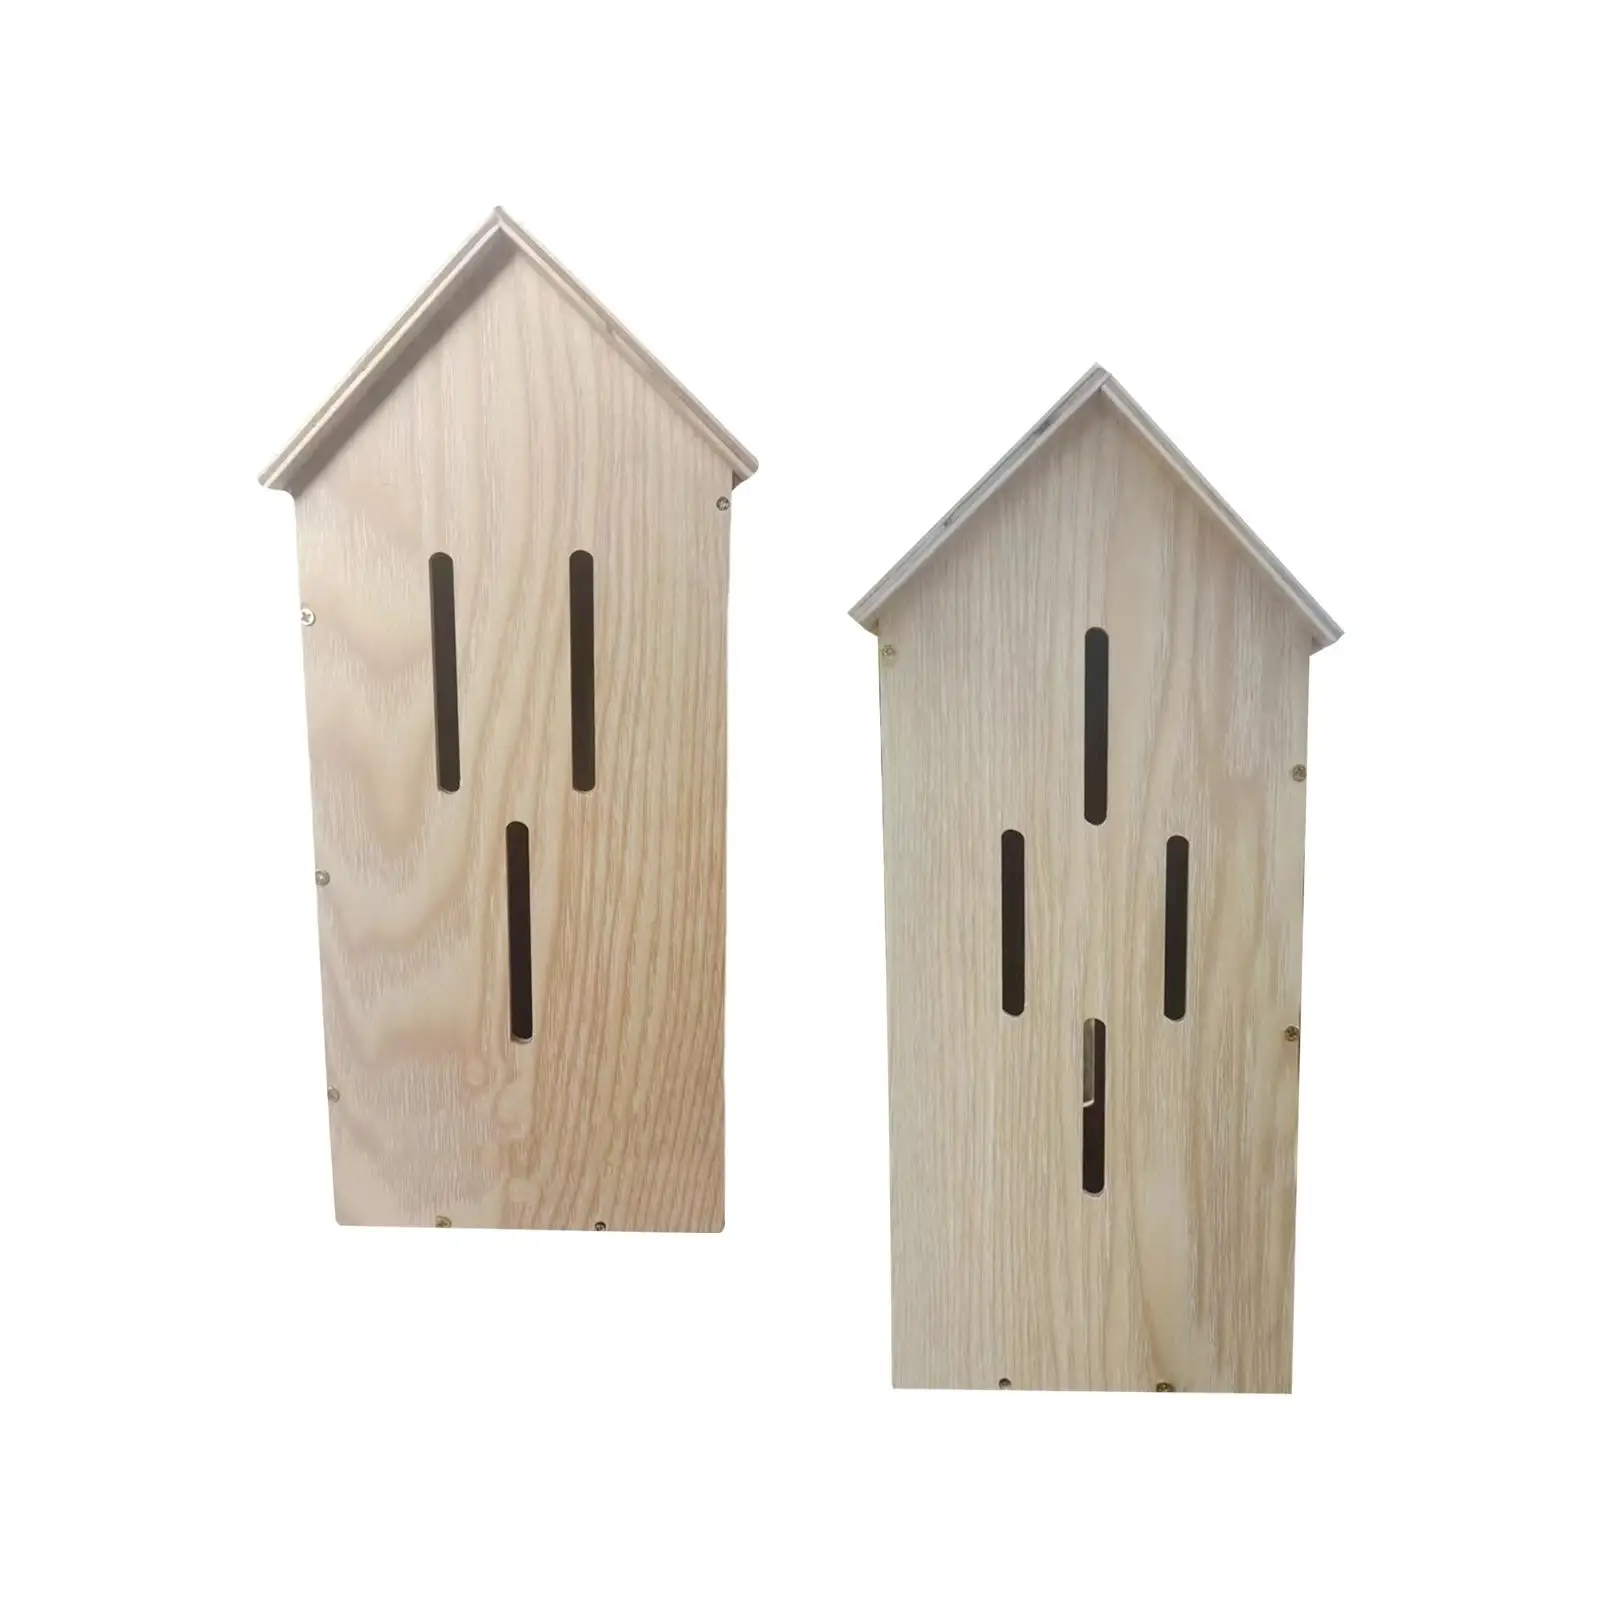 House Tree Guards Trunk Protector Butterfly Habitat Supplies Wooden Butterfly House for Garden